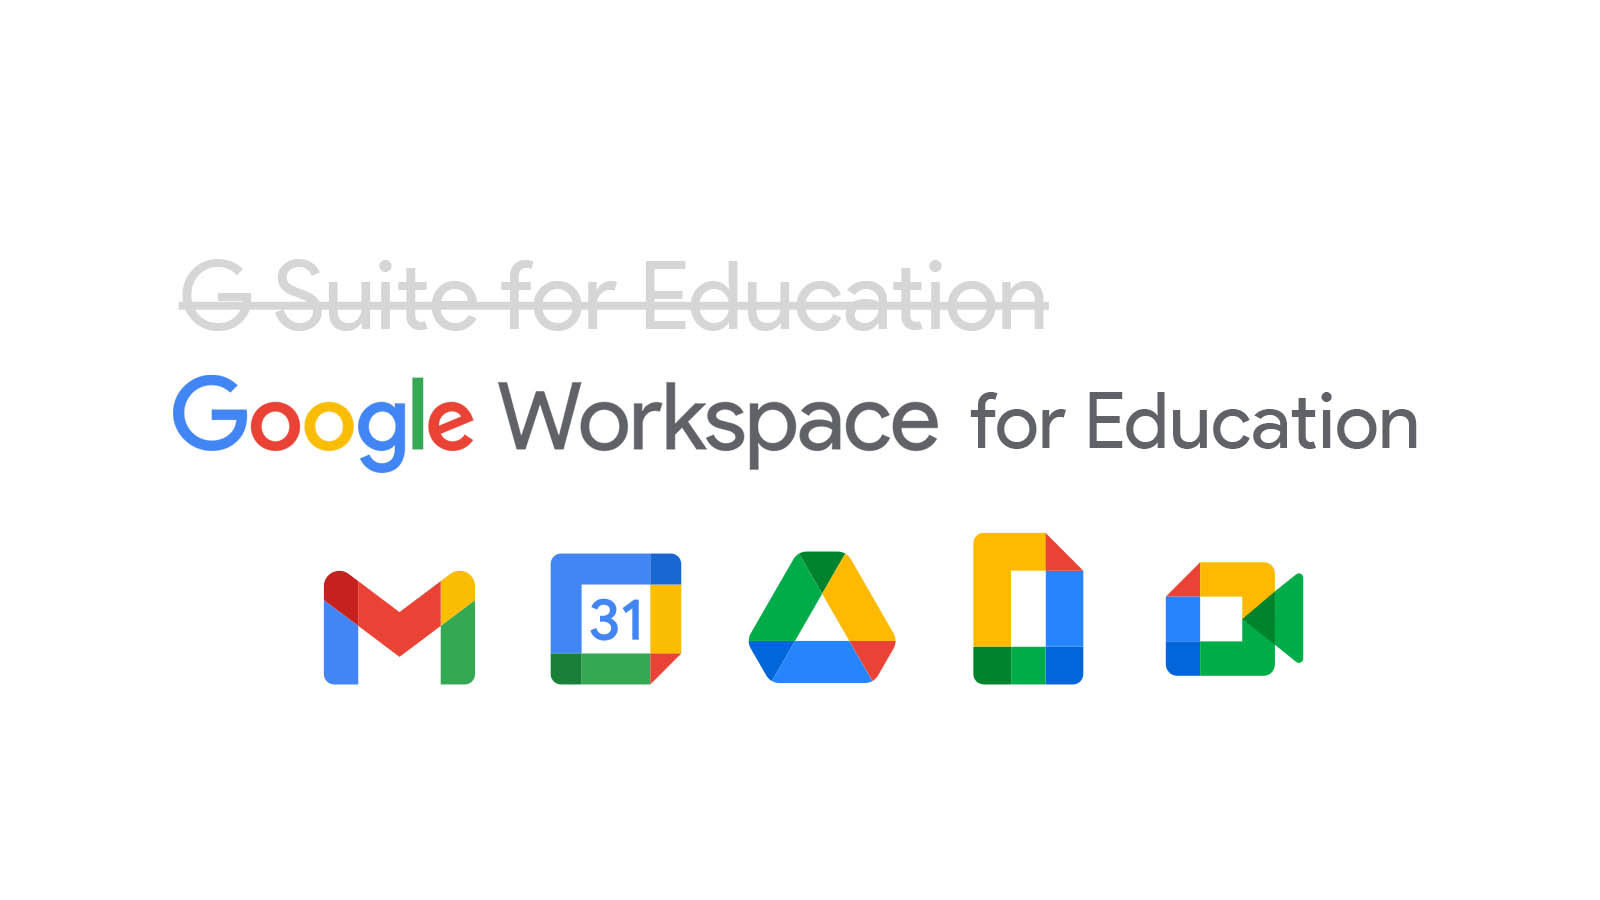 G Suite for Education - will now be Google Workspace for Education.